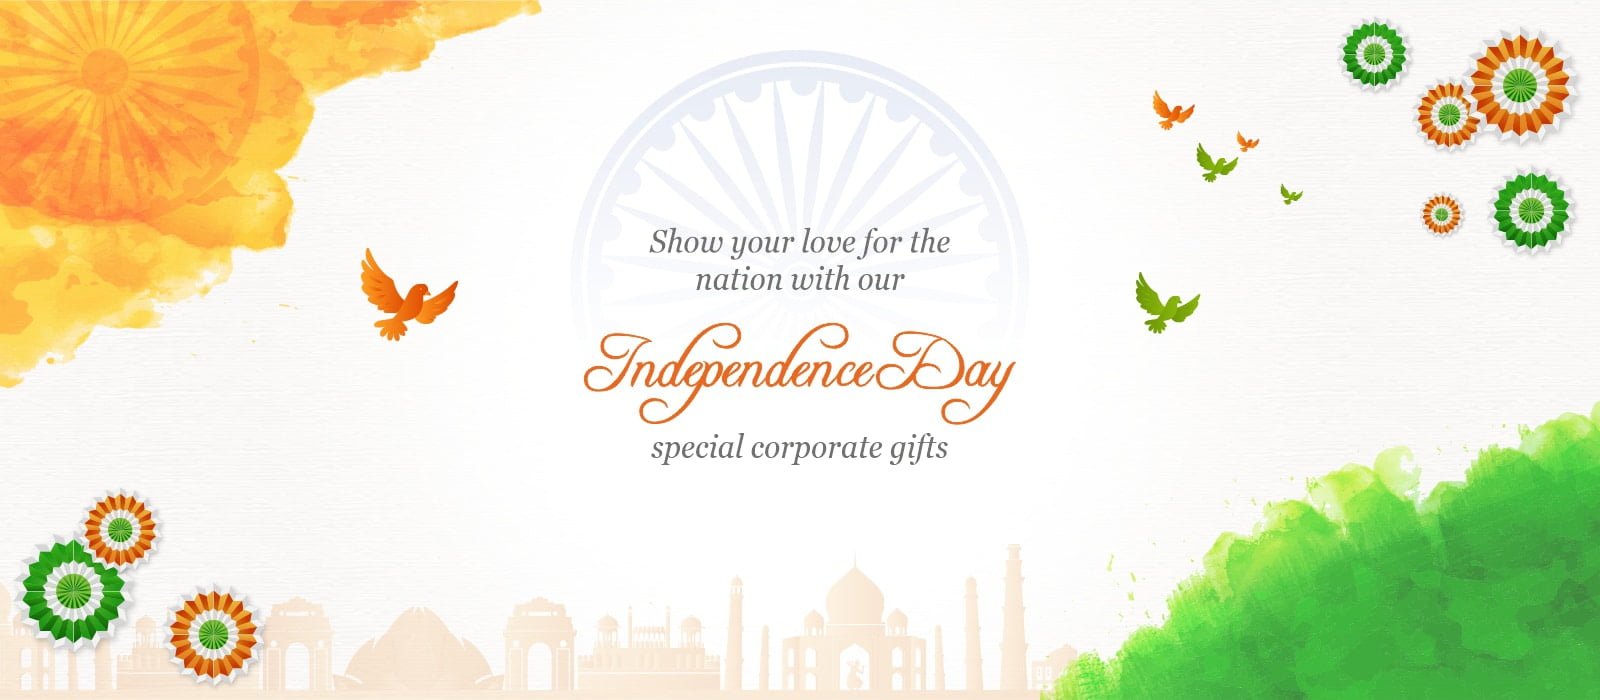 Top 10 Corporate Gift Ideas to Celebrate Independence Day in Style - The  Gift Nexus